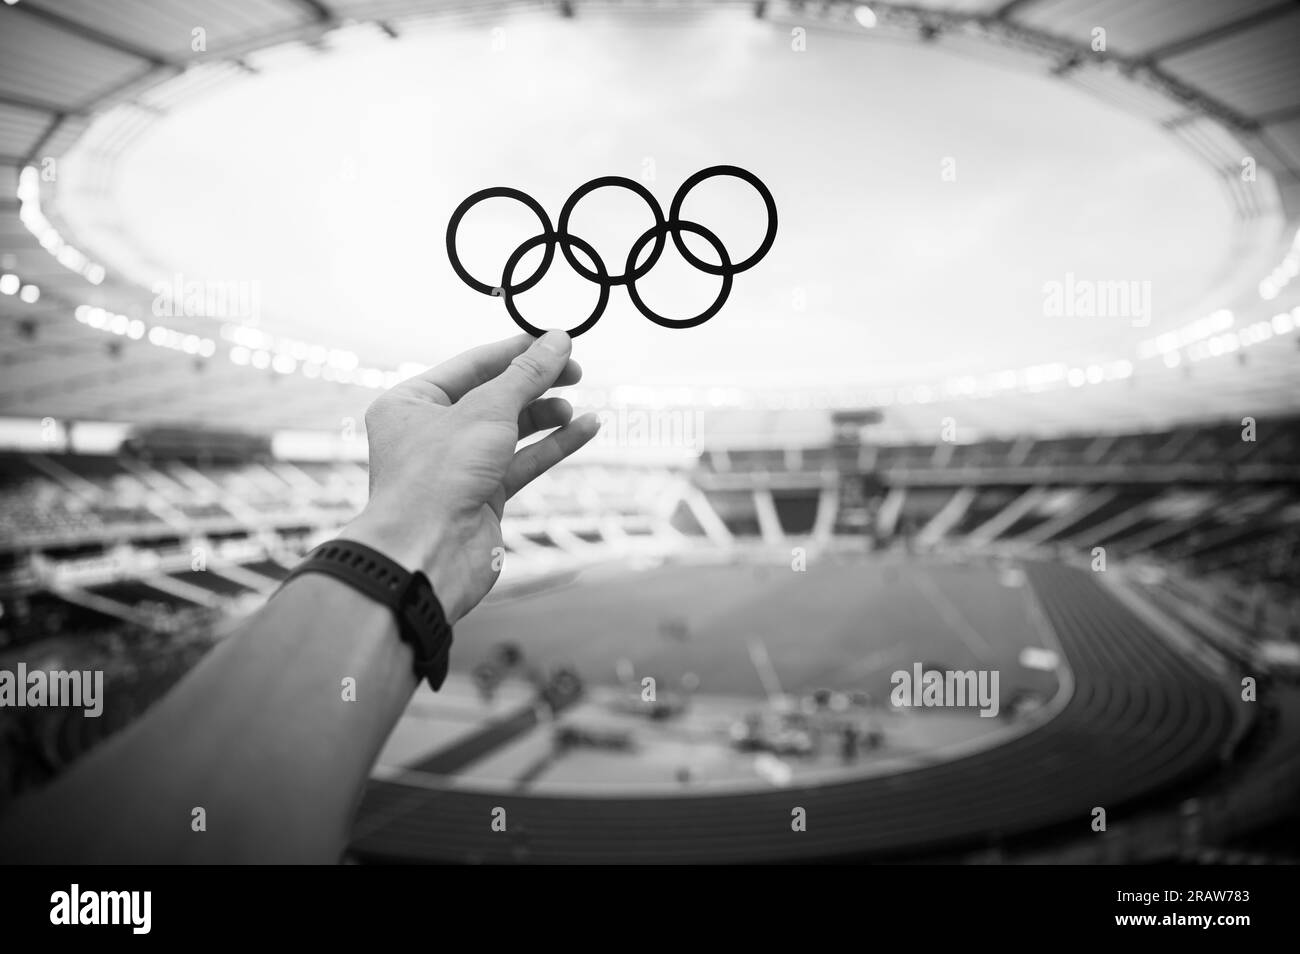 PARIS, FRANCE, JULY 7, 2023: Athlete Holds Olympic Rings Symbol with Pride. Photo for Summer Olympic Games in Paris 2024. Stock Photo